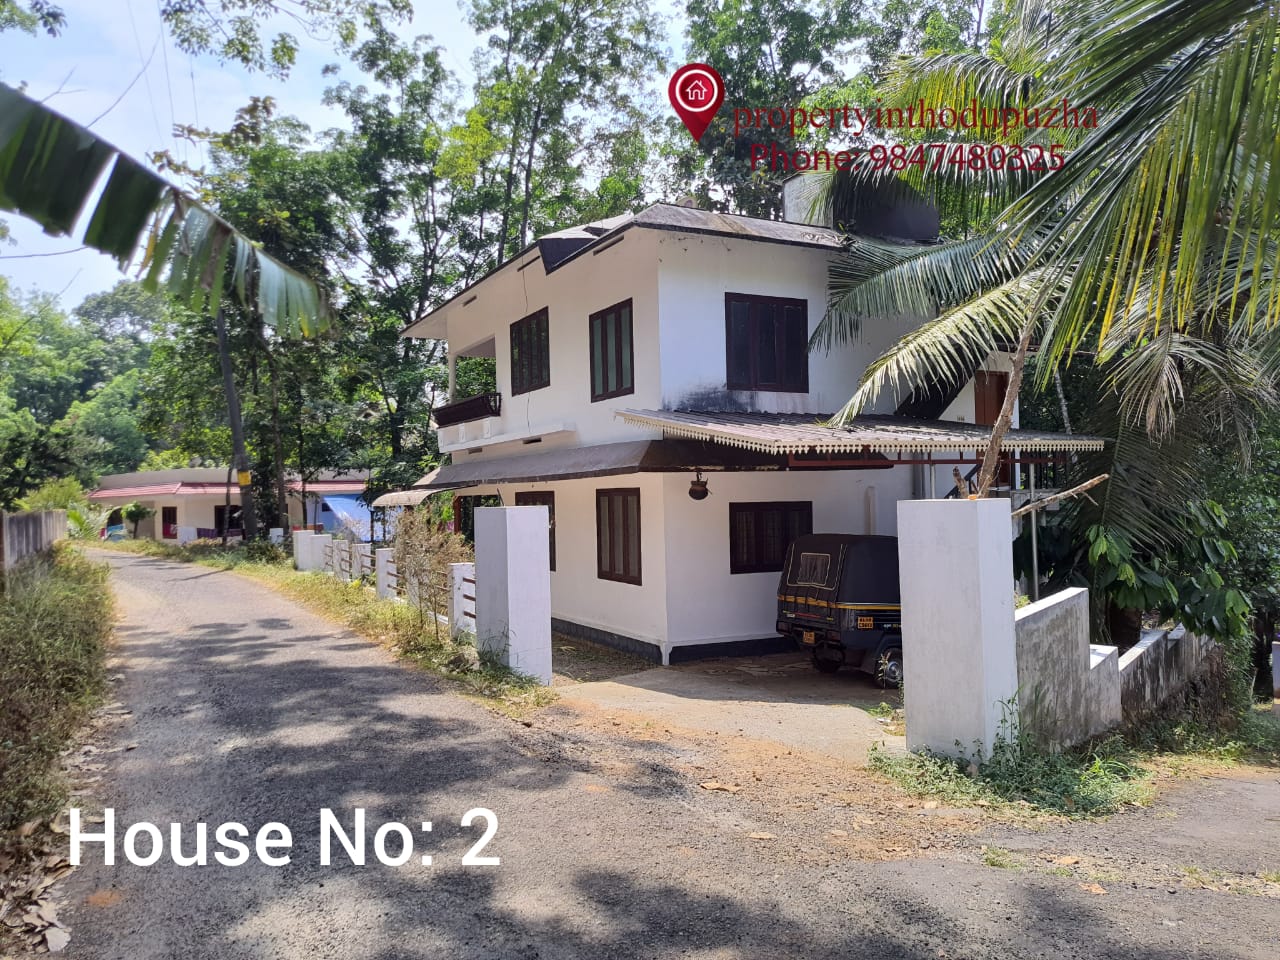 Old house for sale at thodupuzha